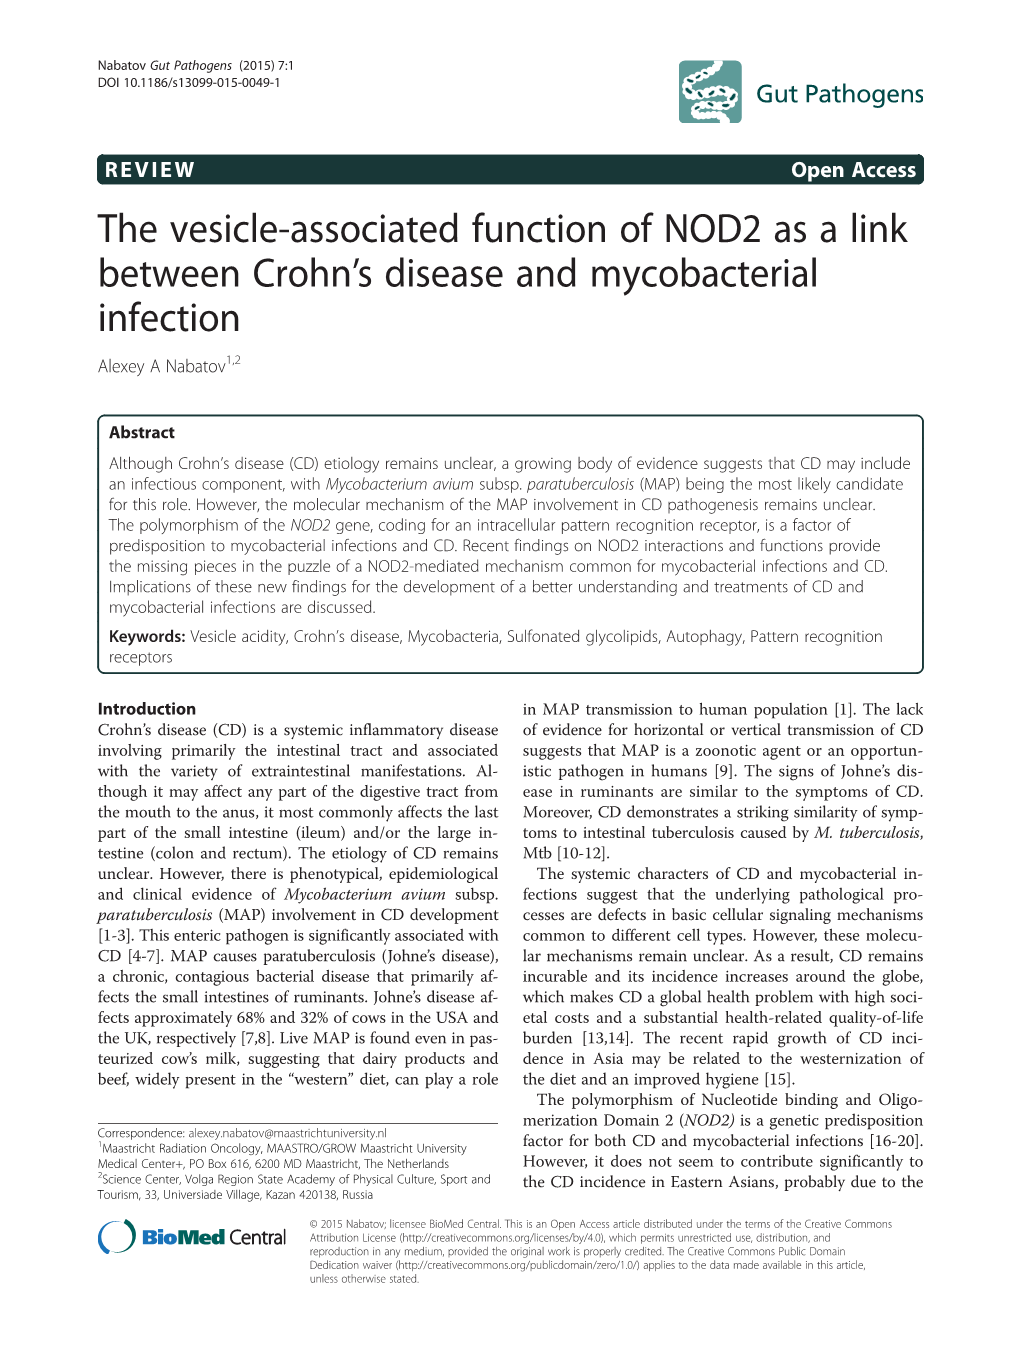 The Vesicle-Associated Function of NOD2 As a Link Between Crohn's